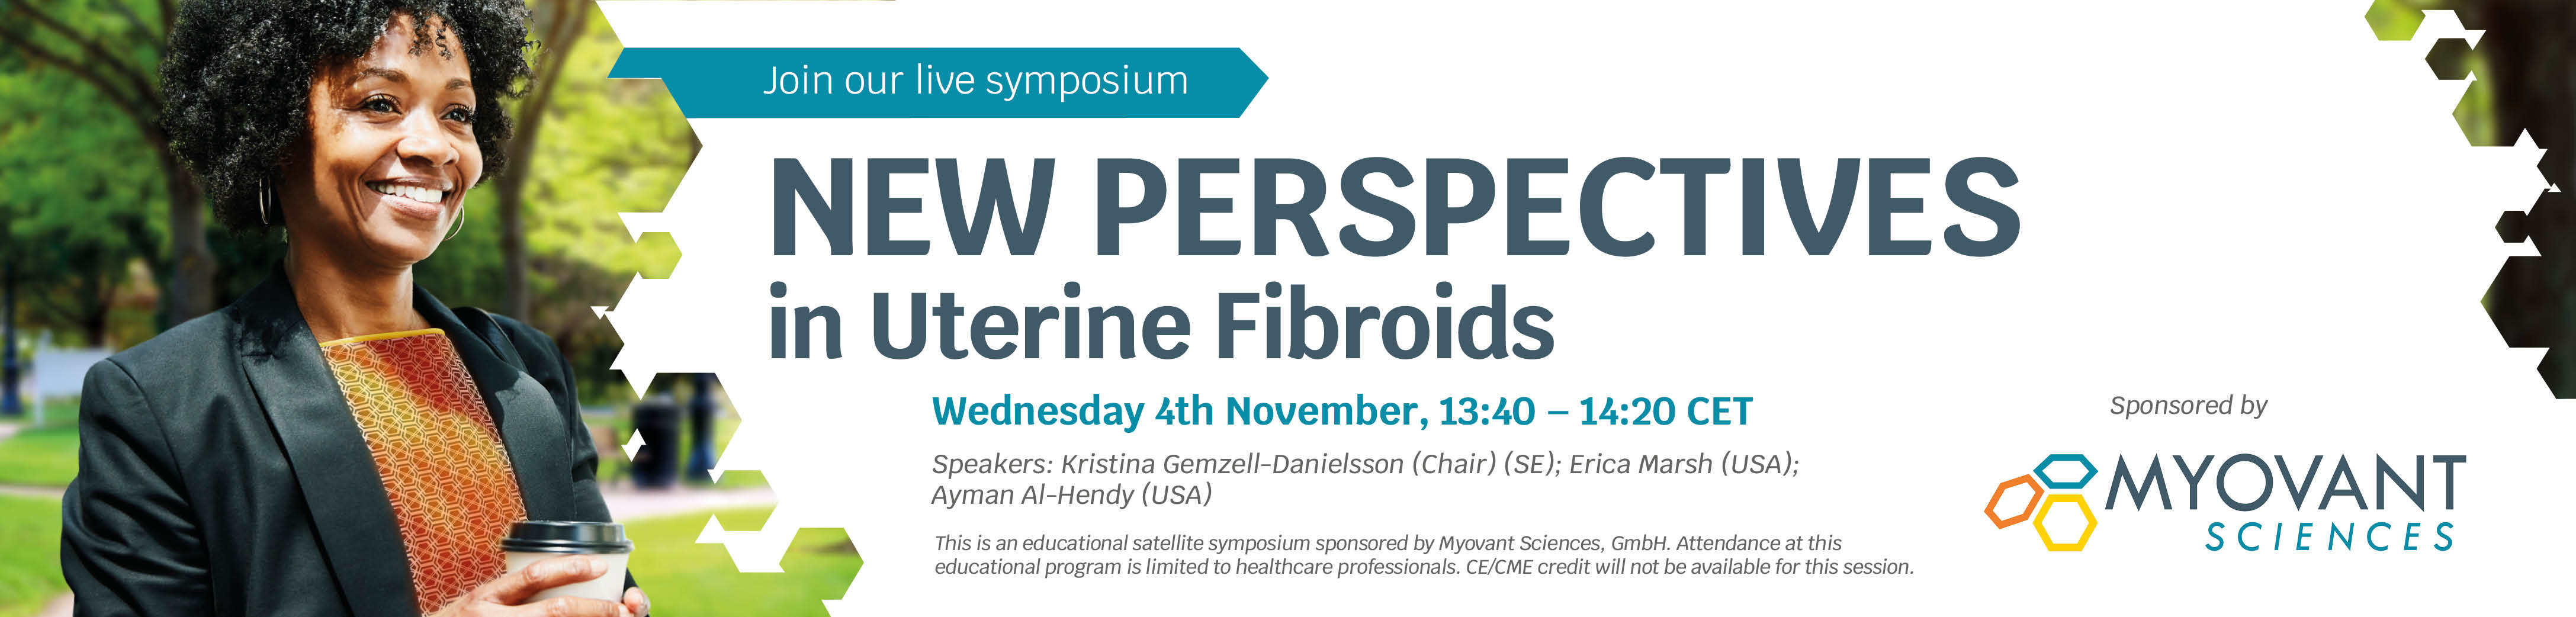 Join our live symposium: NEW PERSPECTIVES in Uterine Fibroids